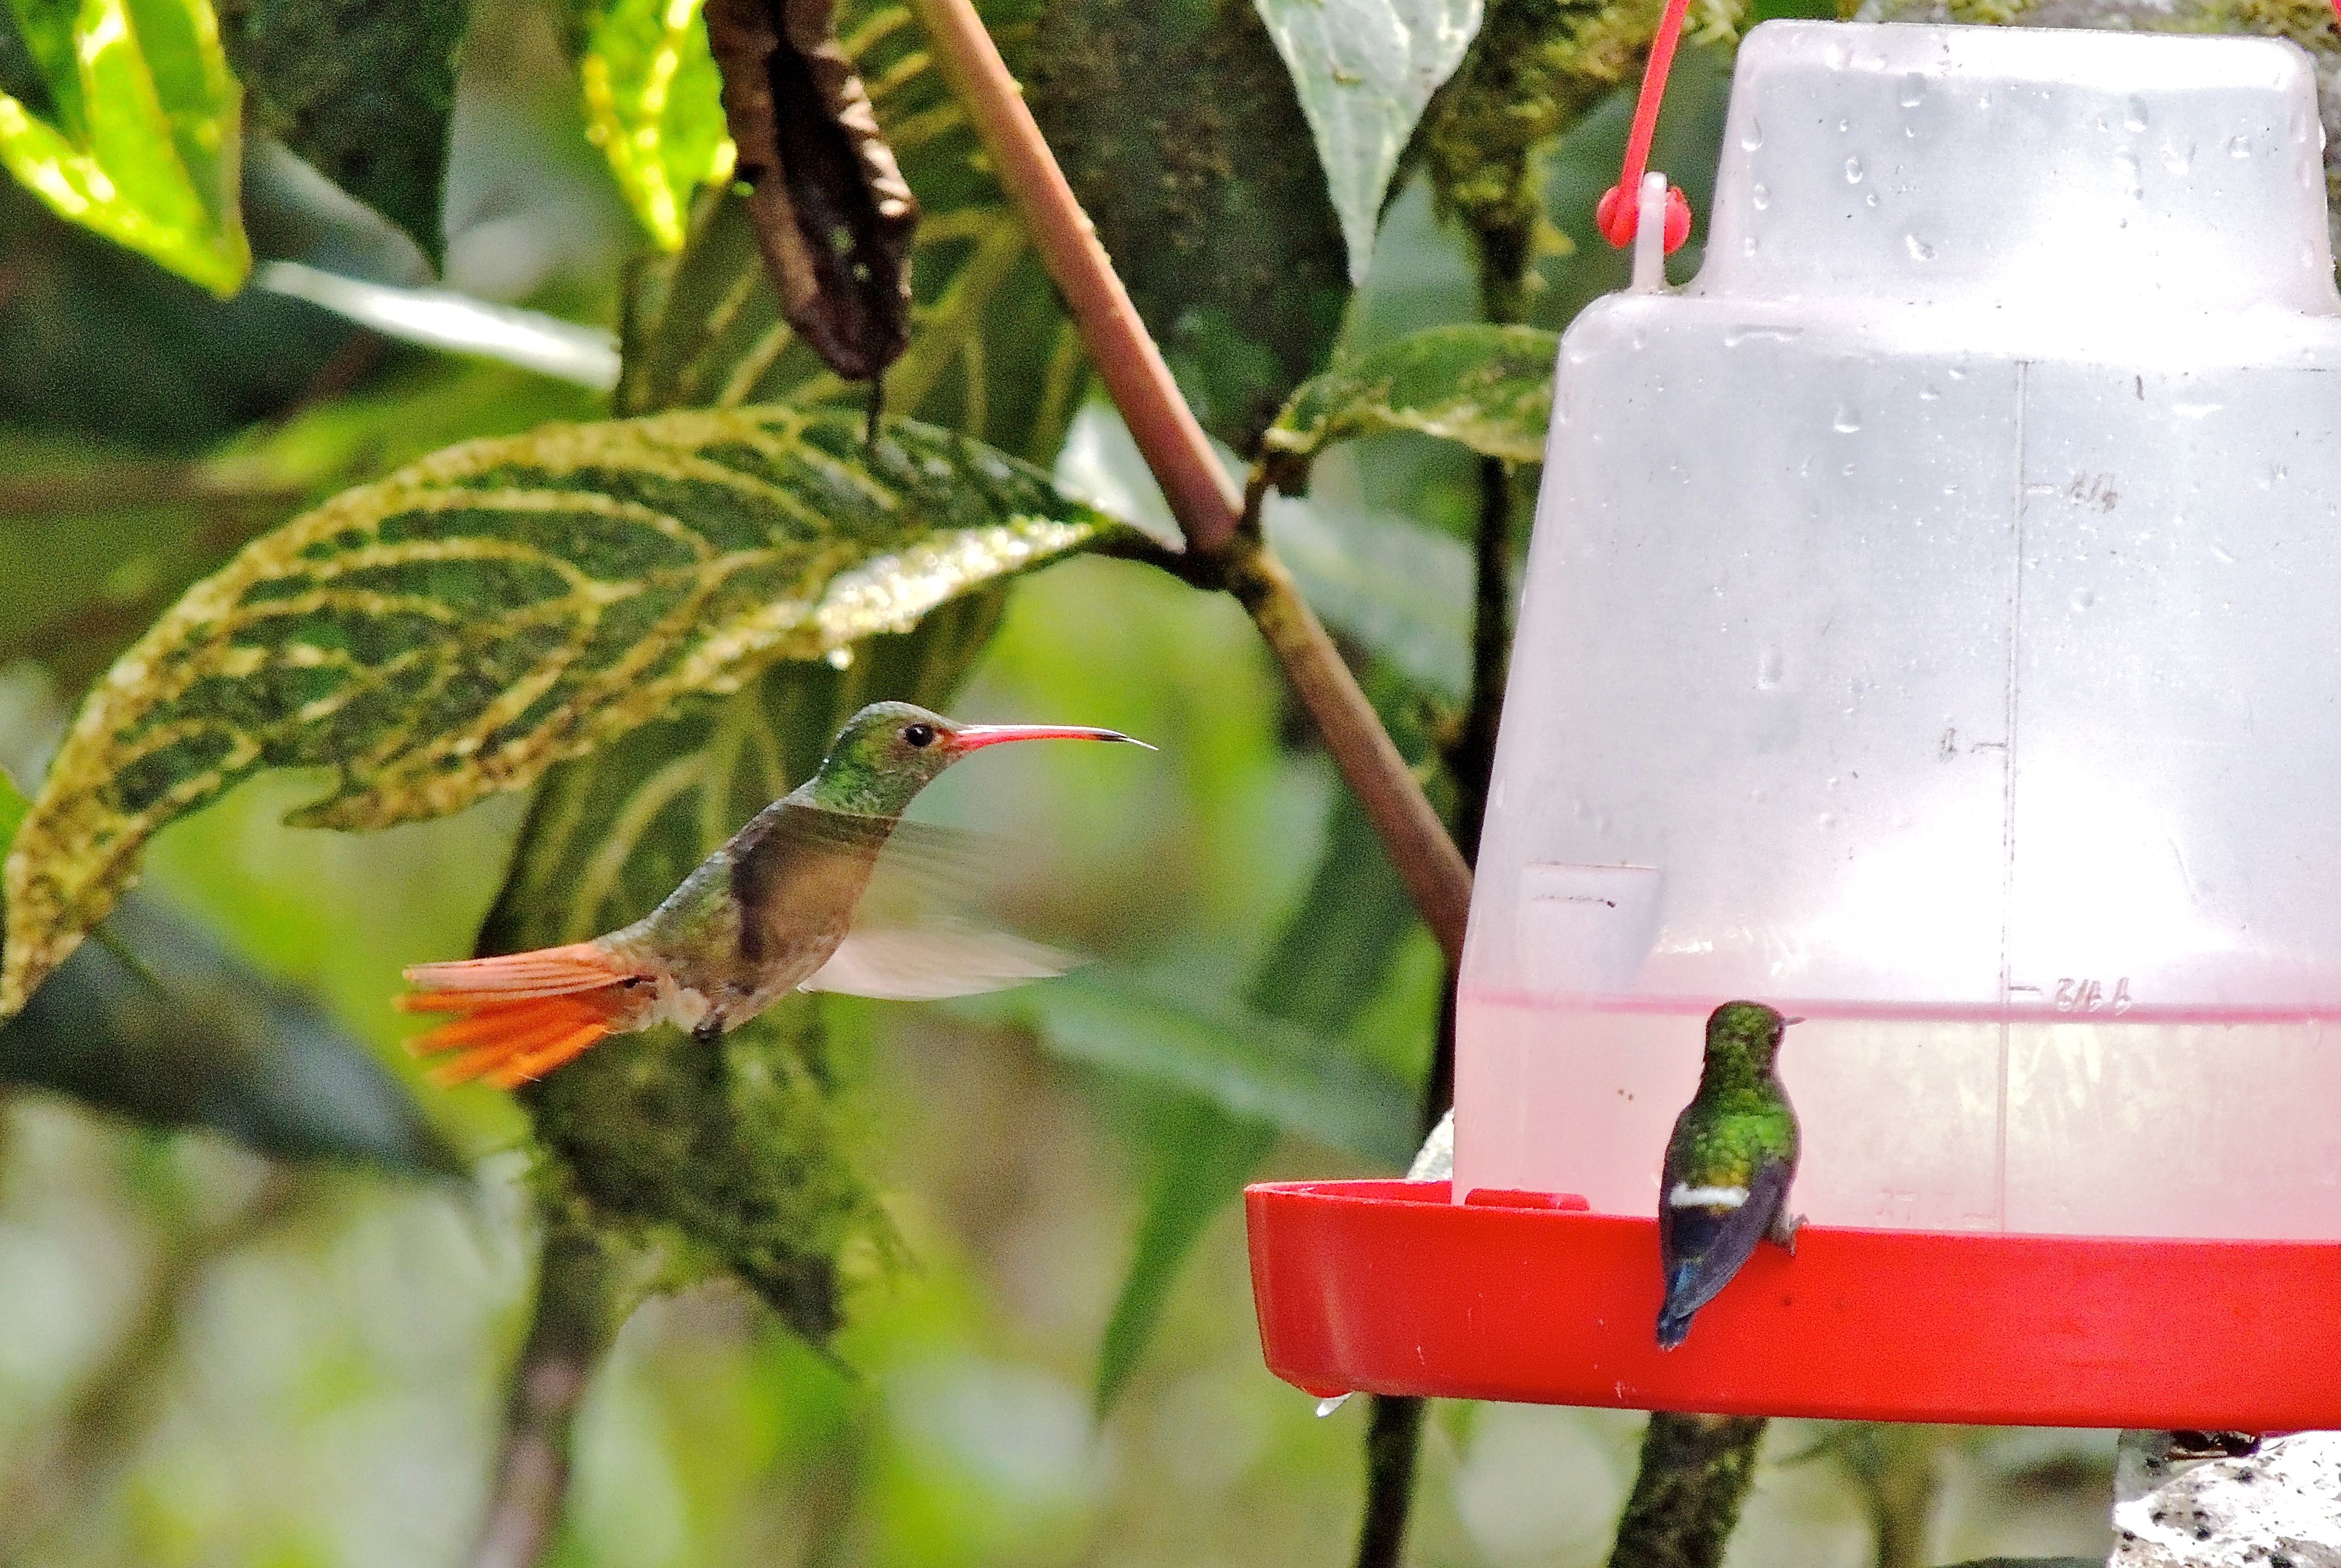 Rufous-tailed Hummingbird and Green Thorntail